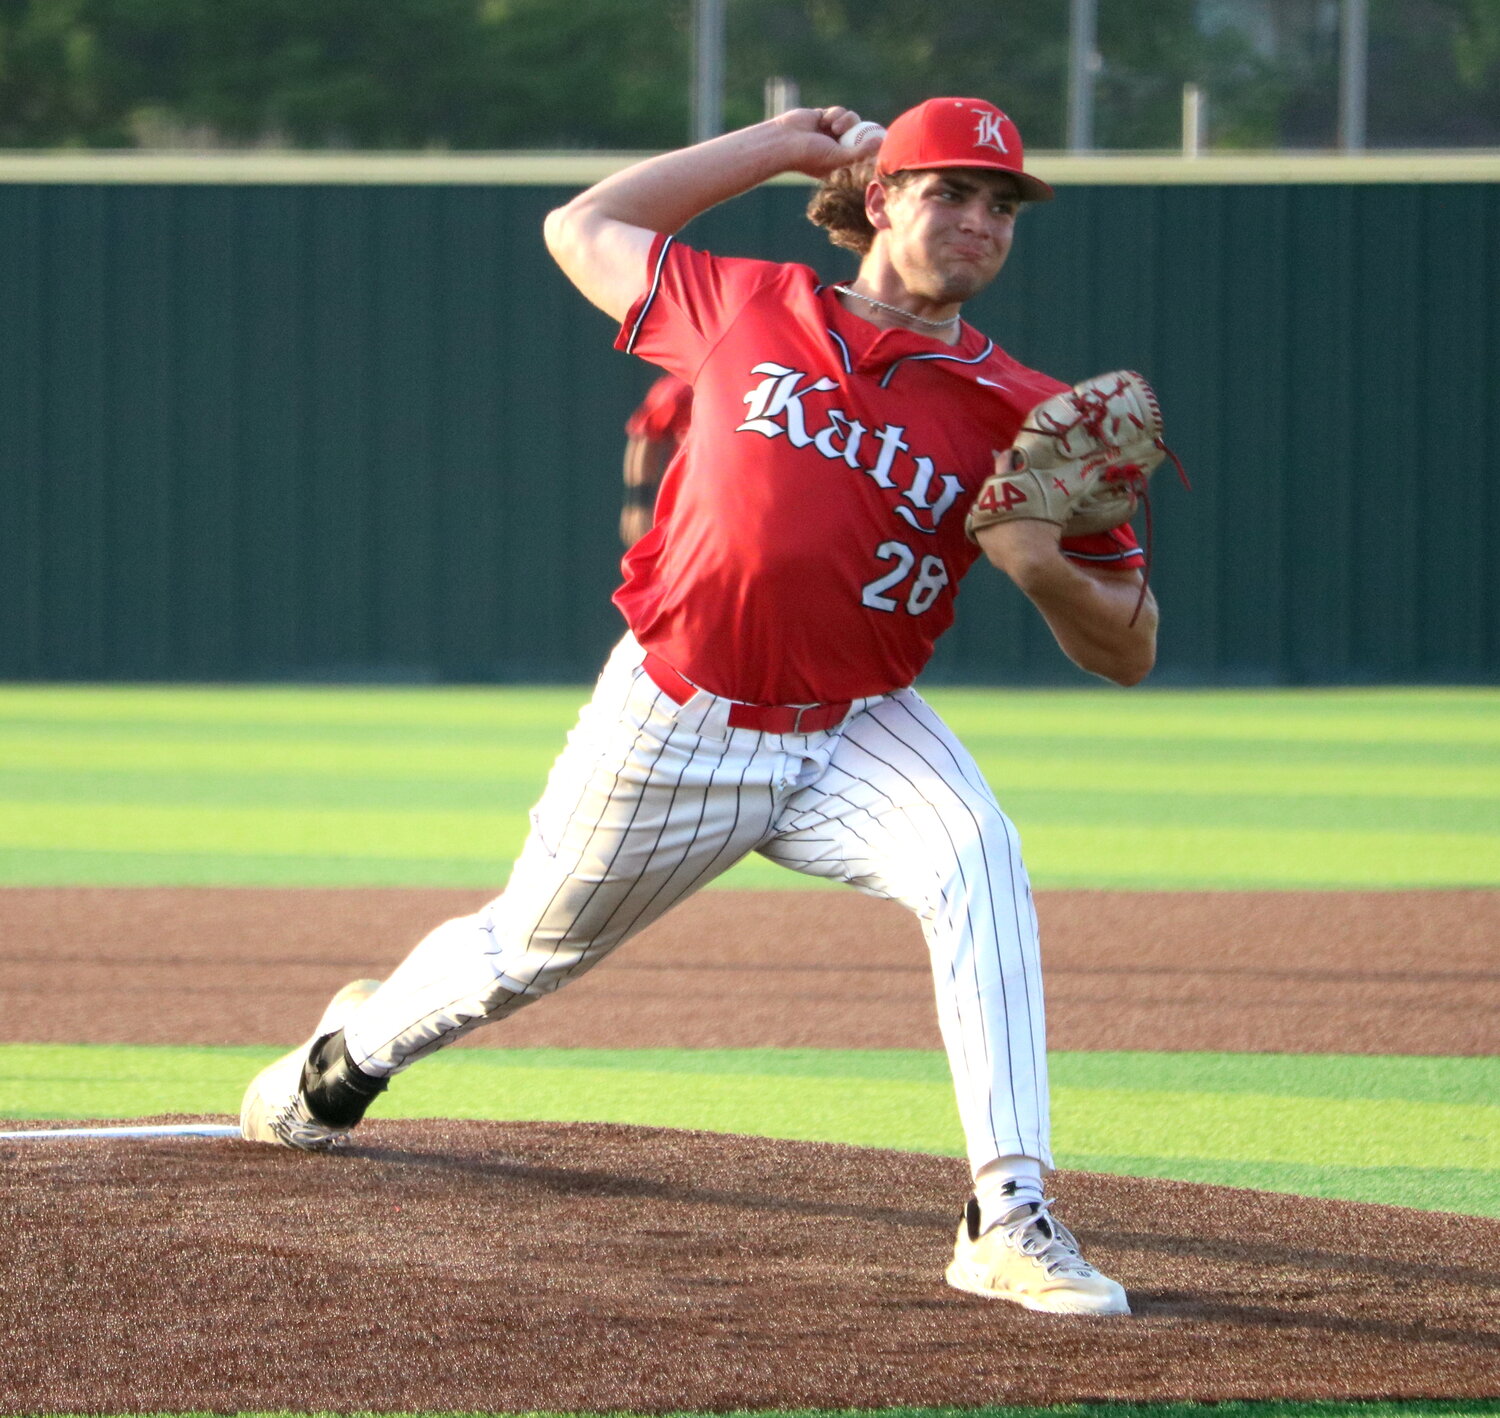 Cole Kaase pitches during Friday's area round game between Katy and Cy-Fair at Langham Creek.